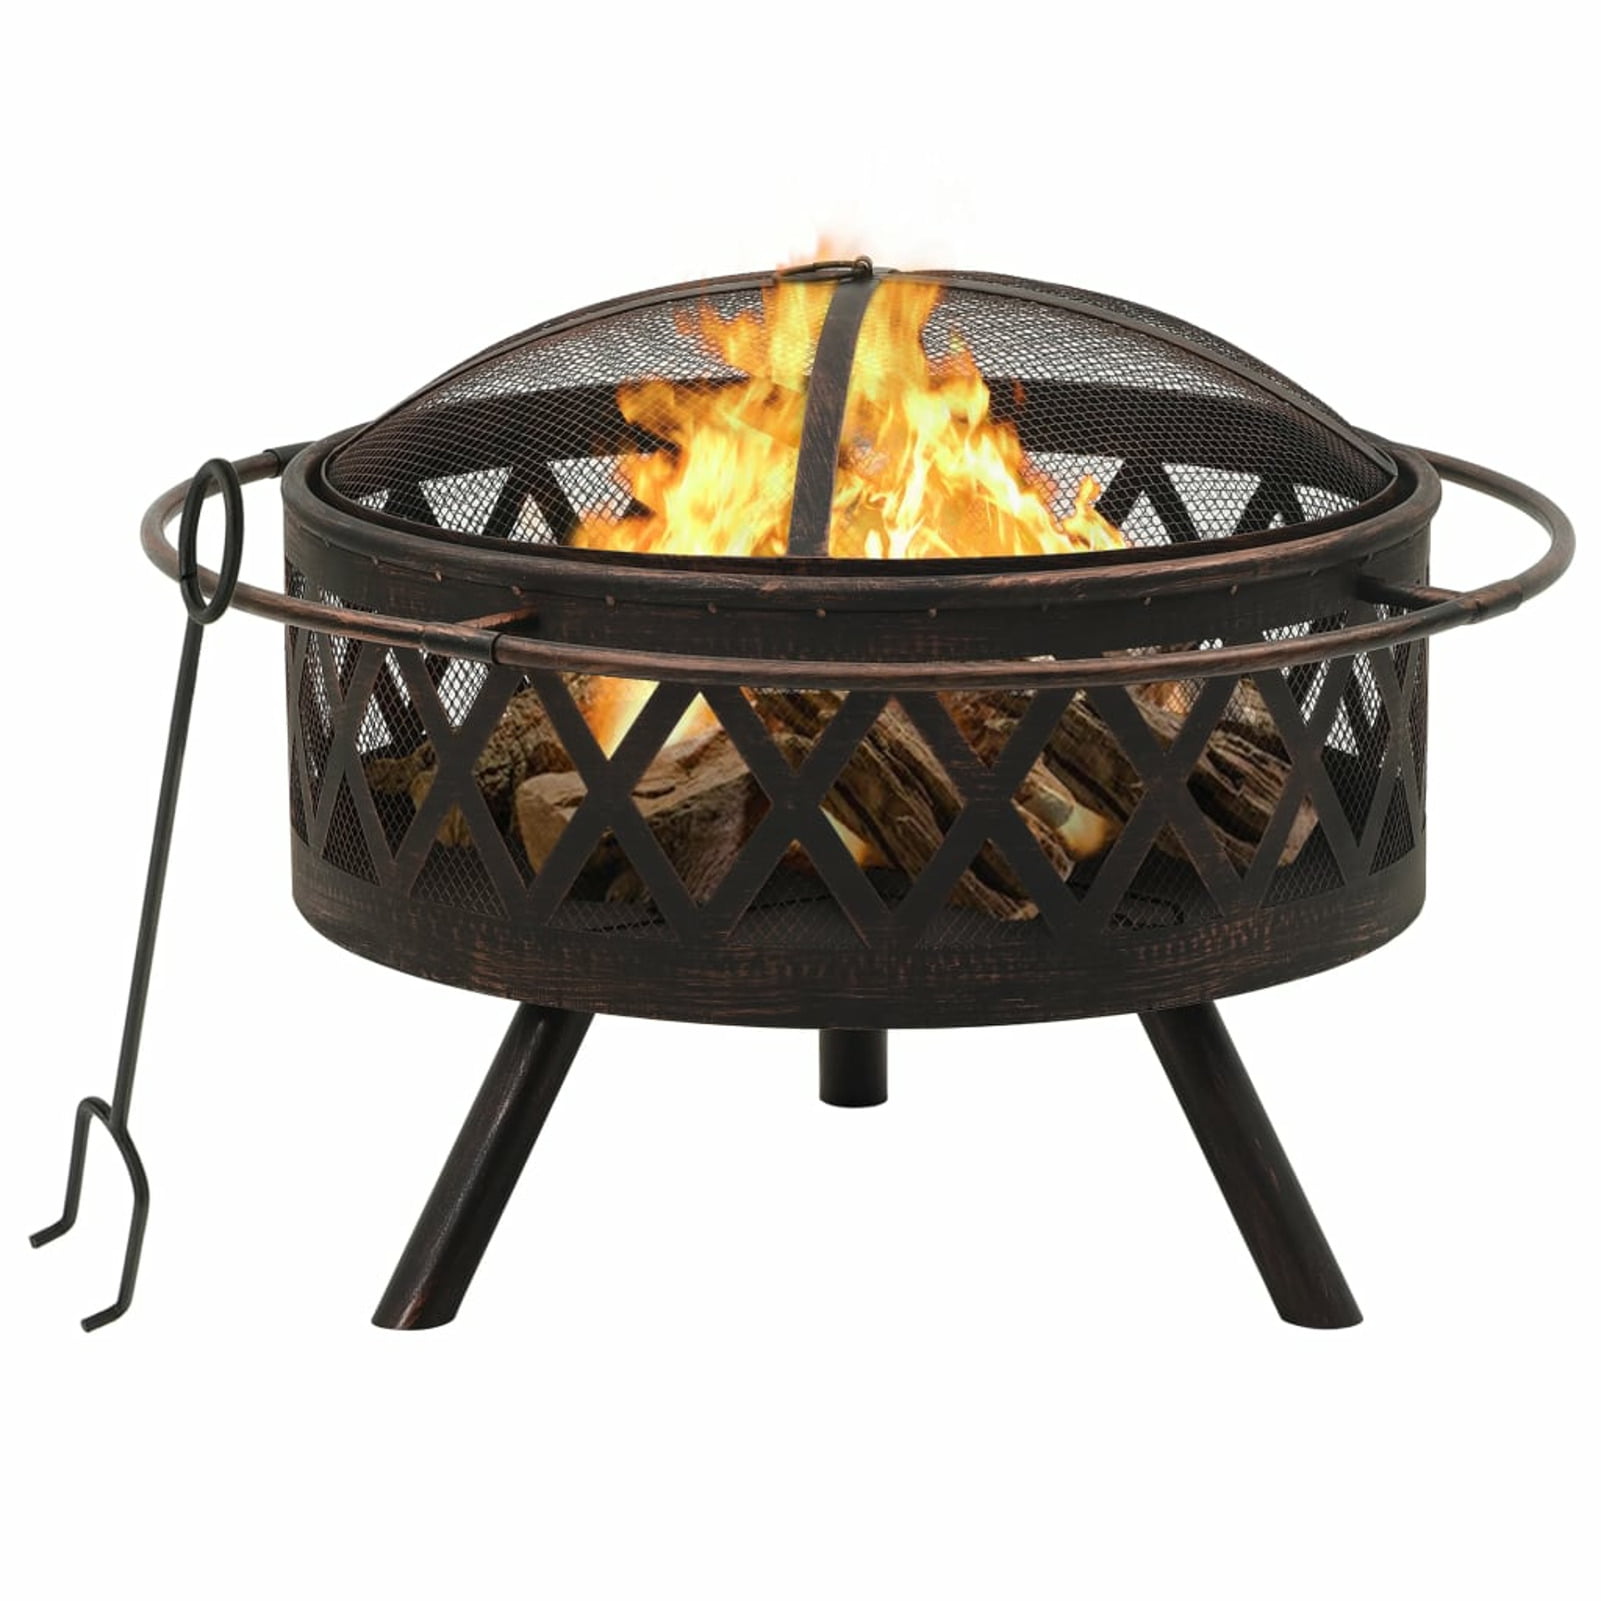 Details about   Sunnydaze Fire Poker 32" Steel Fireplace Fire Pit Accessory with Wood Handle 